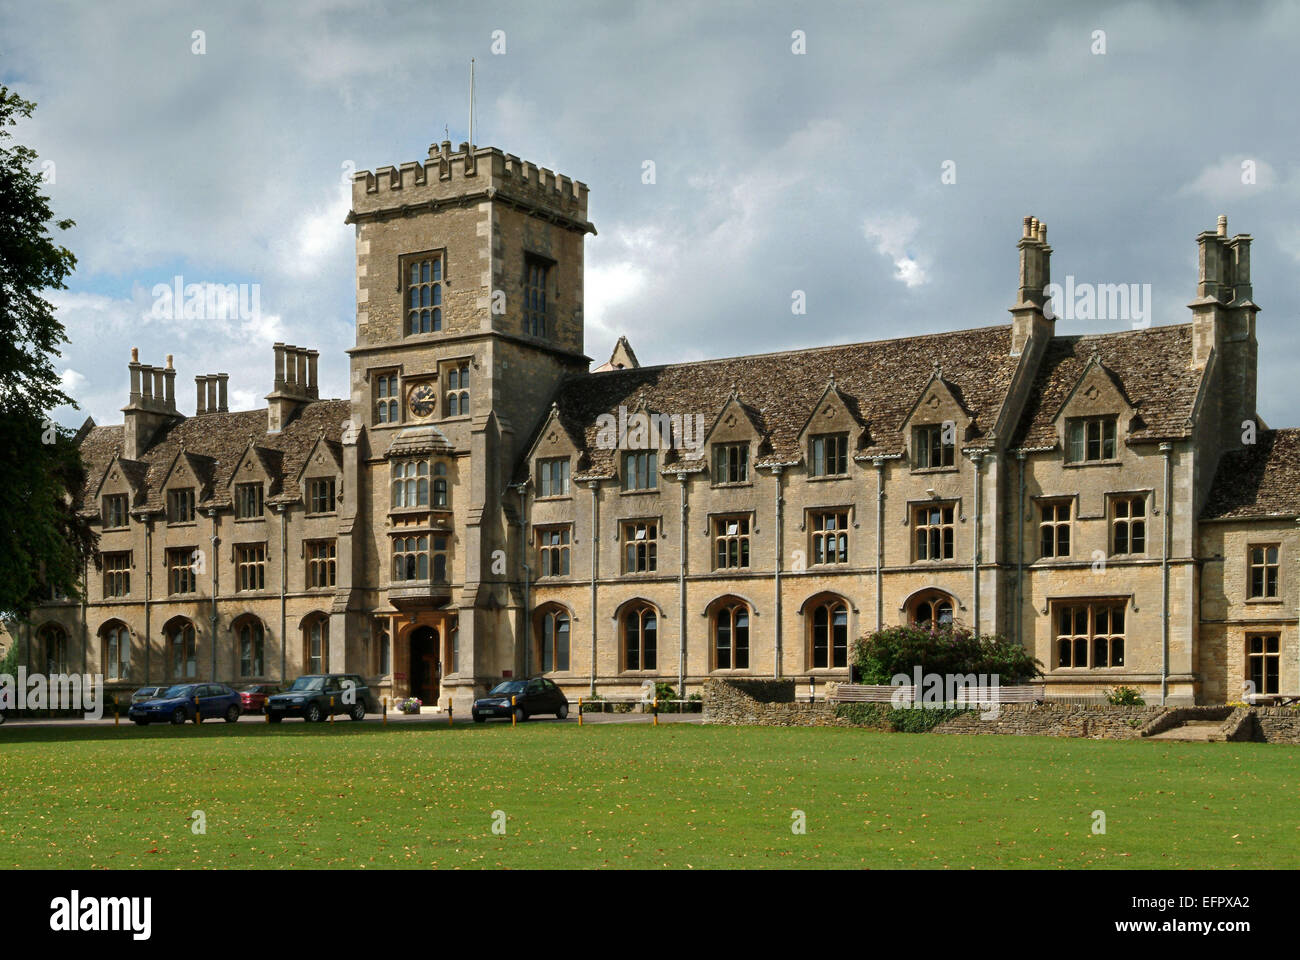 Royal Agricultural University (RAU),formerly the Royal Agricultiral College (RAC),Cirencester,Gloucestershire,UK.farming rural Stock Photo